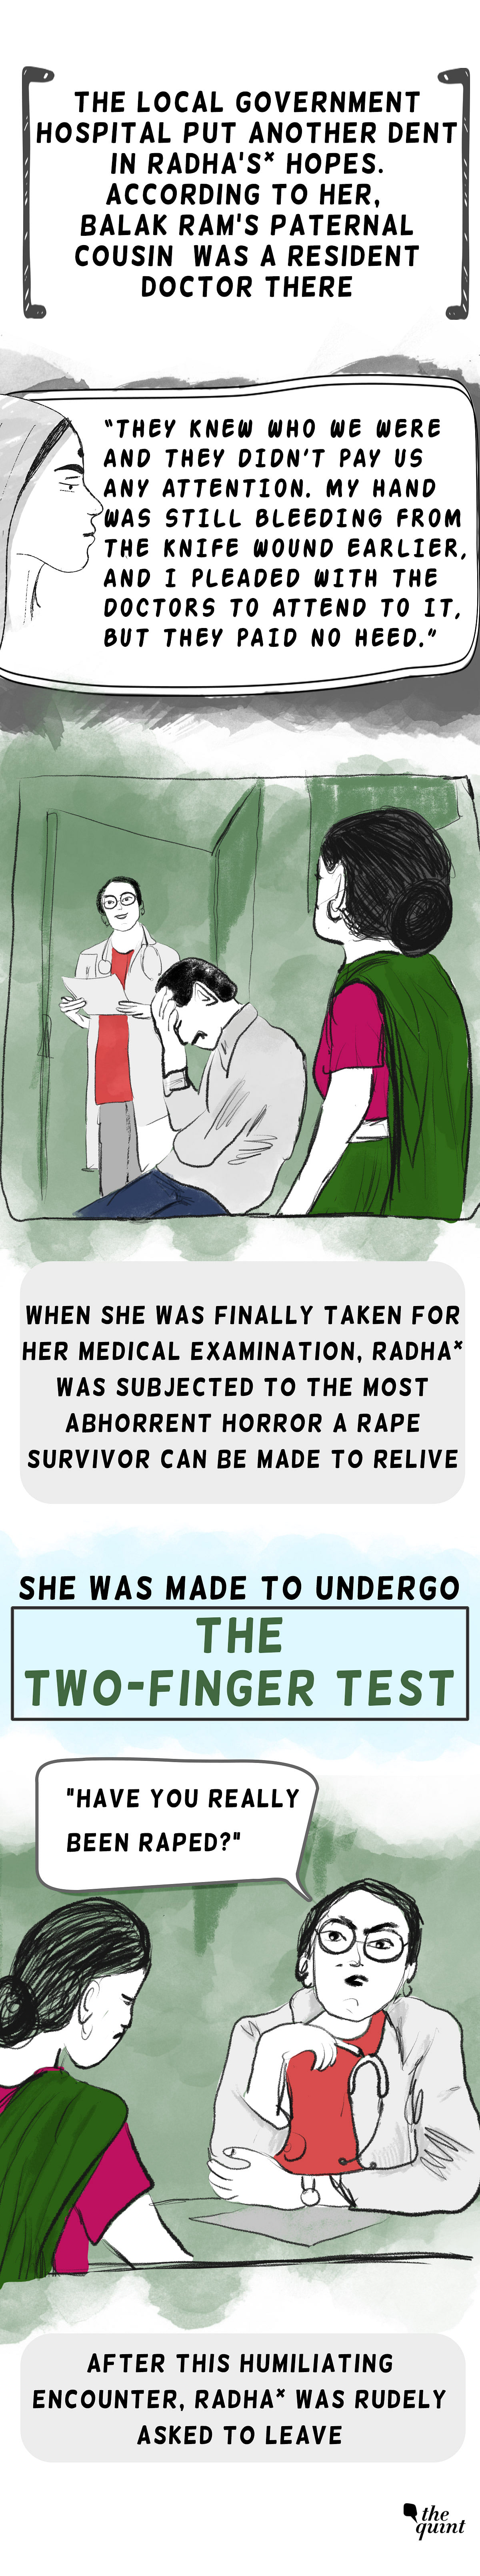 Radha* was raped by an upper-caste farmer, and later made to undergo a two-finger test to ascertain rape.